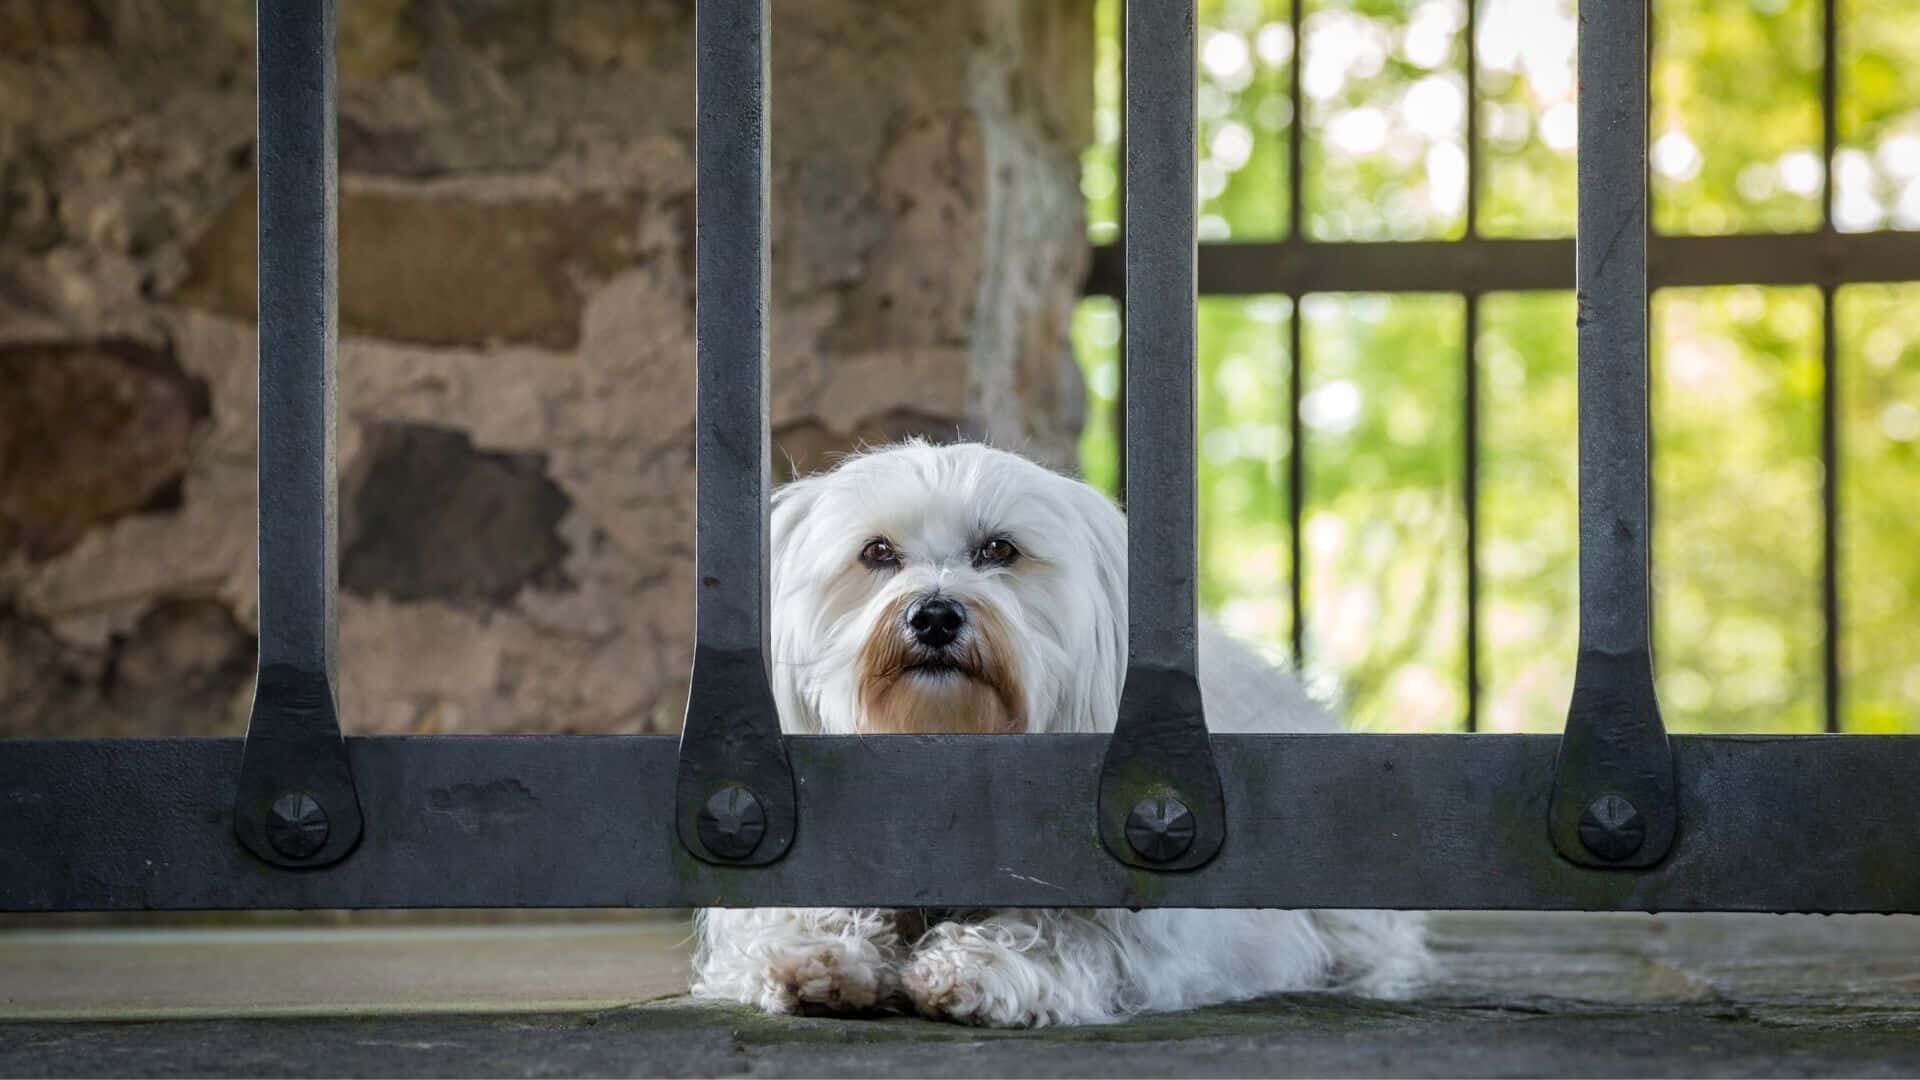 How to cage a dog?